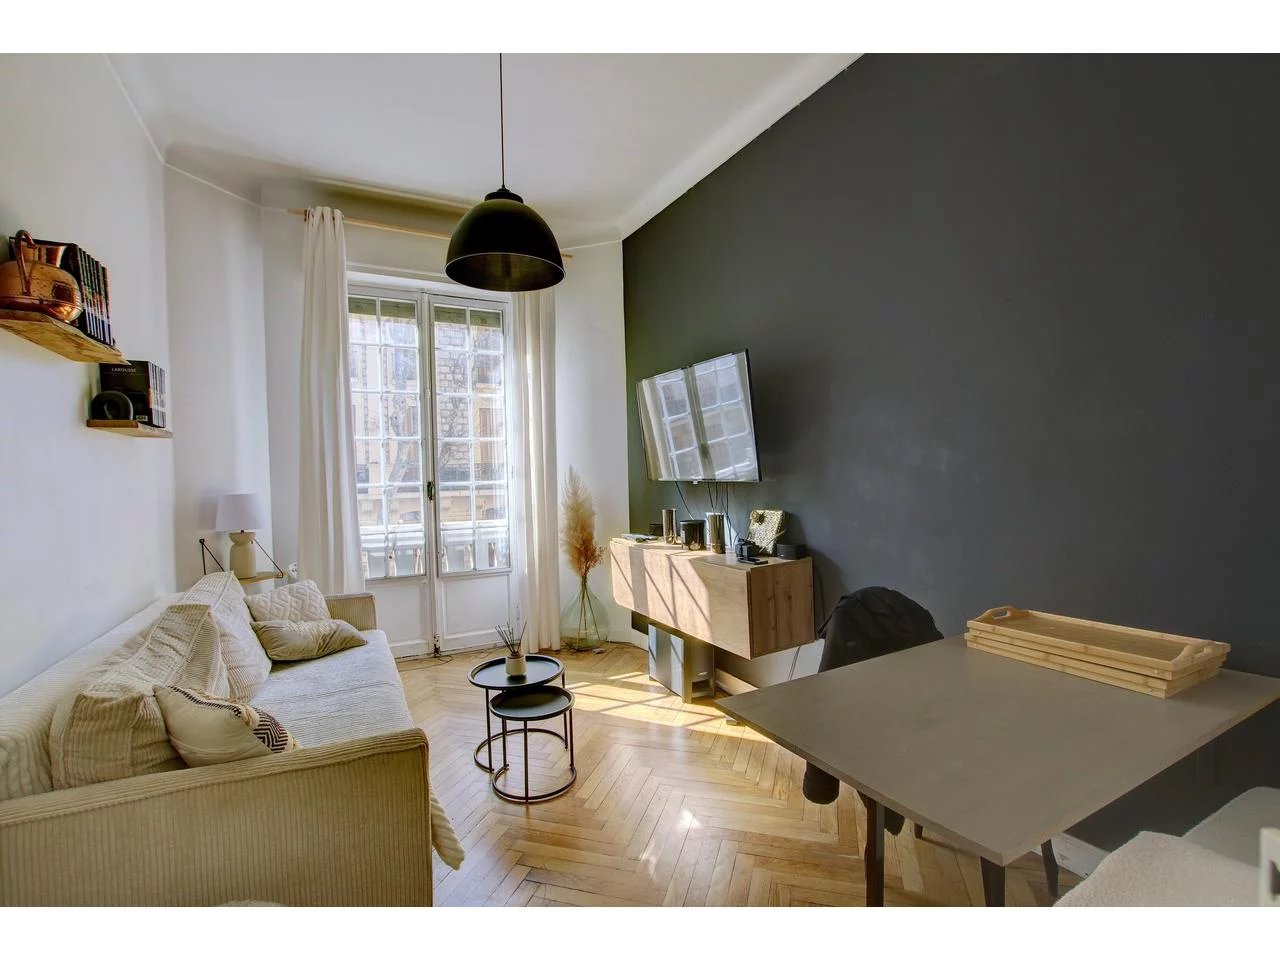 Appartement  2 Rooms 35m2  for sale   220 000 €